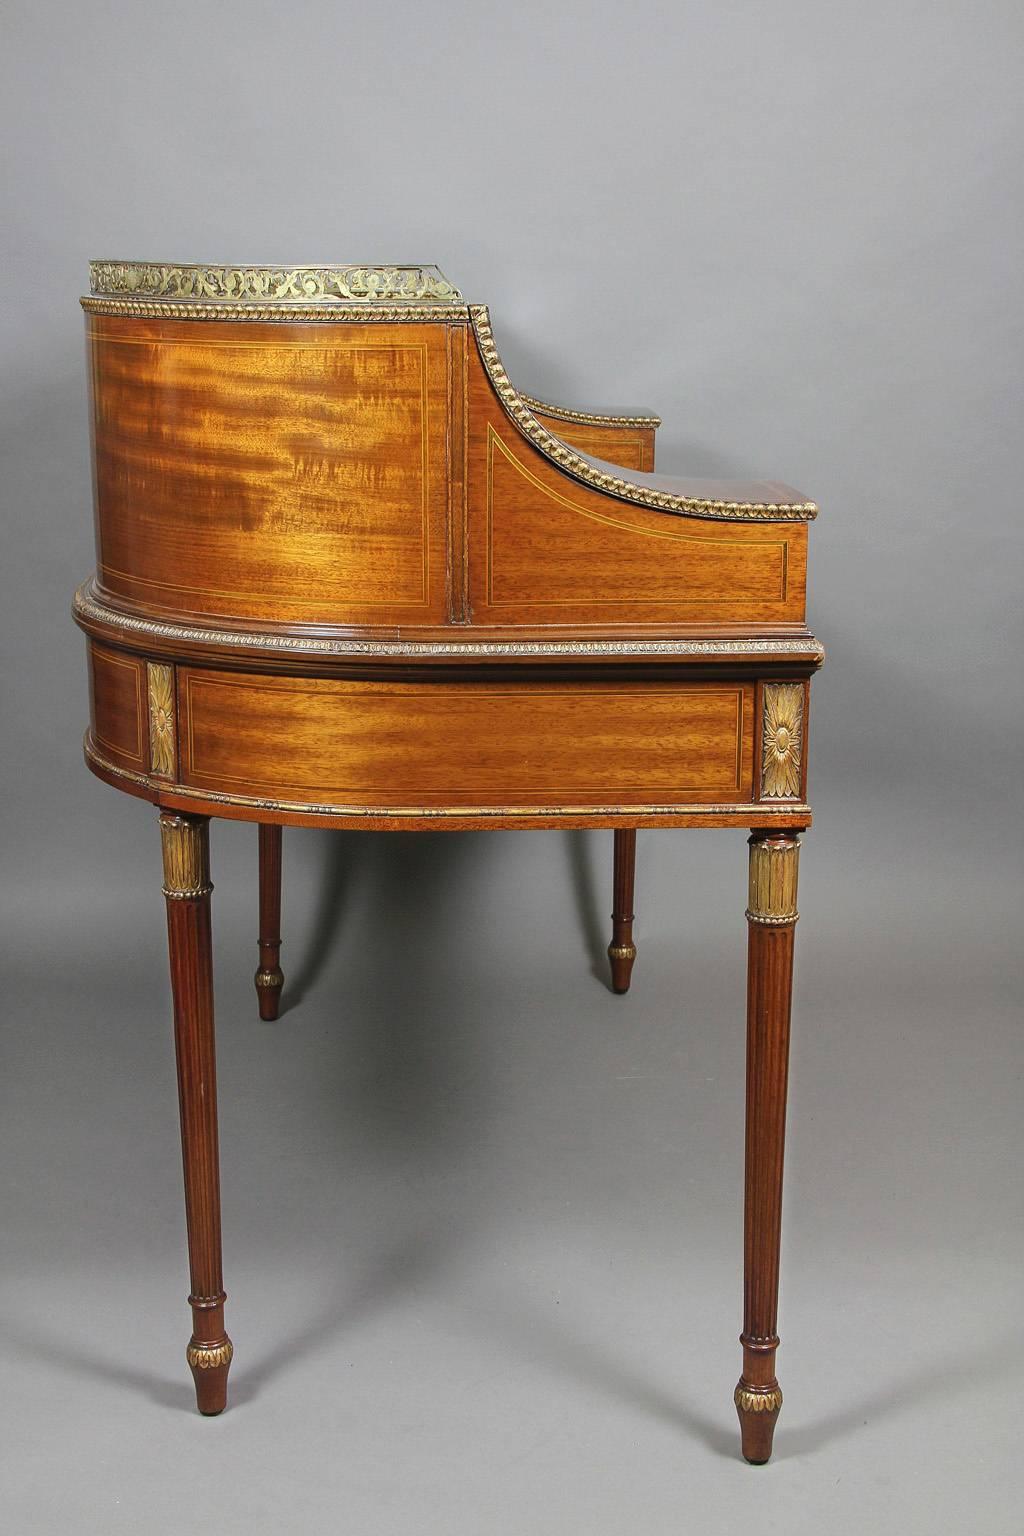 19th Century Fine Regency Style Mahogany, Carved and Gilded Carlton House Desk by Gillows